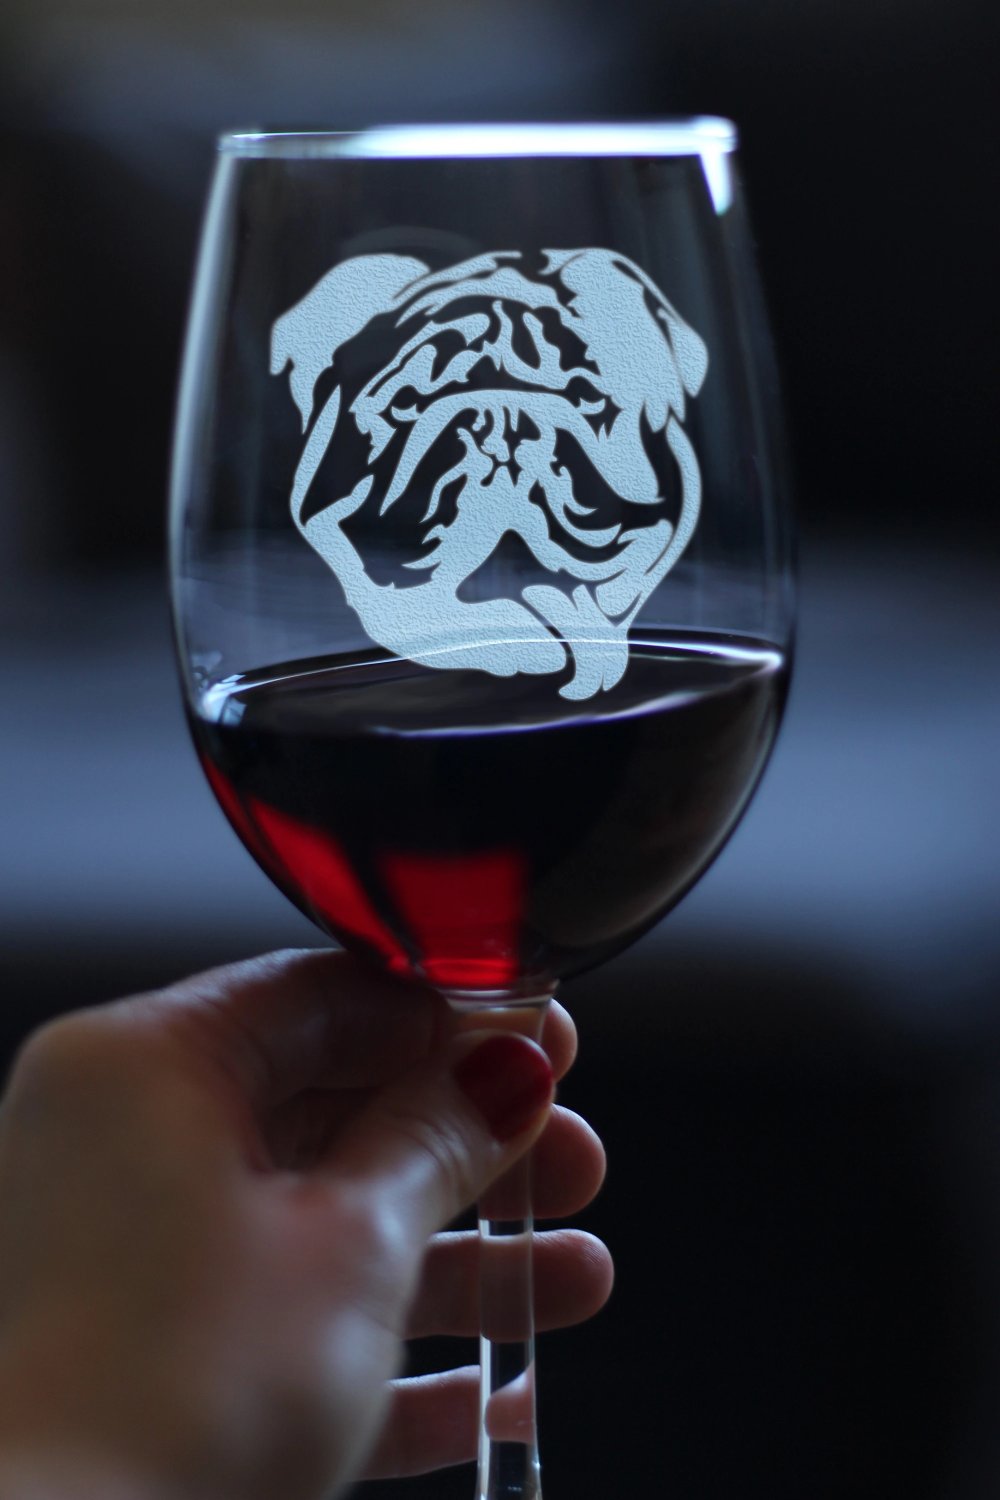 Bulldog Wine Glass with Stem - Large 16.5 oz Glasses - Cute Gifts for Dog Lovers with English Bulldogs